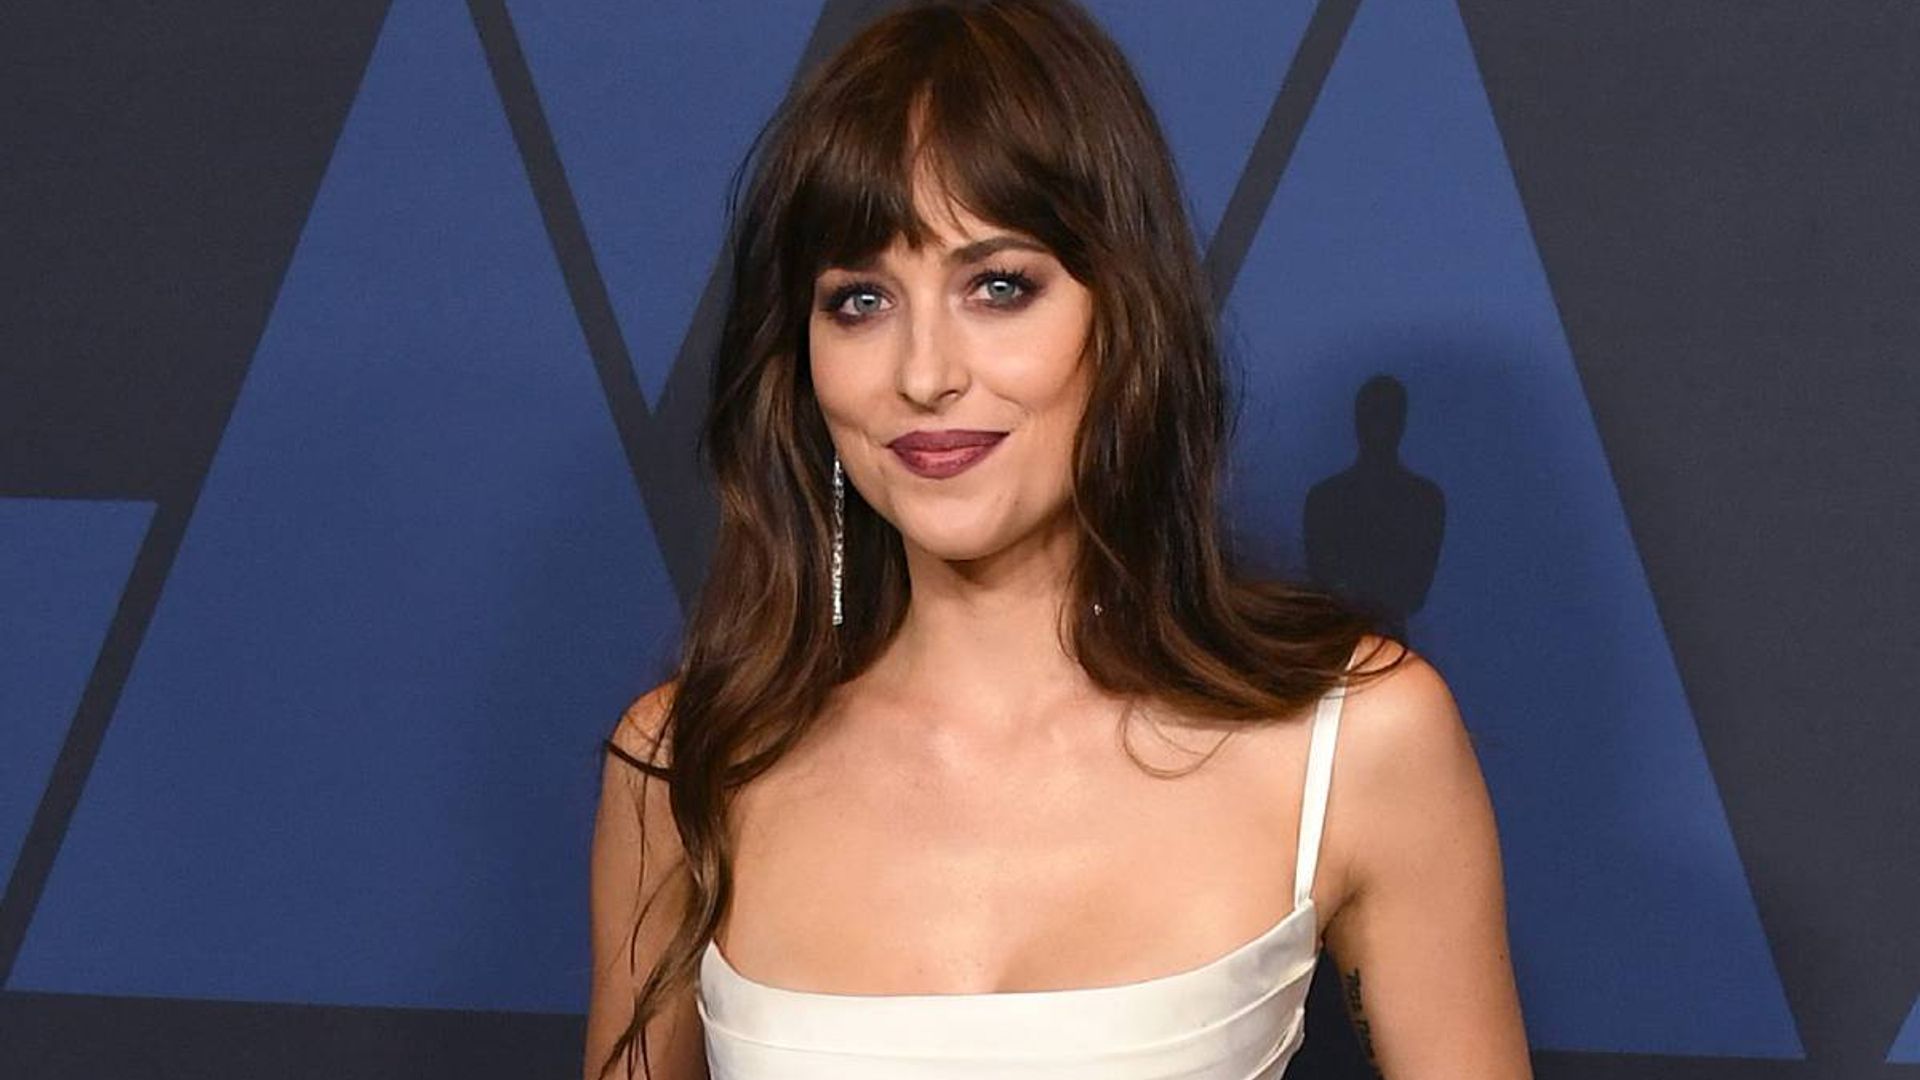 Dakota Johnson Made a Movie Cameo in Sheer Cut-Out Lingerie